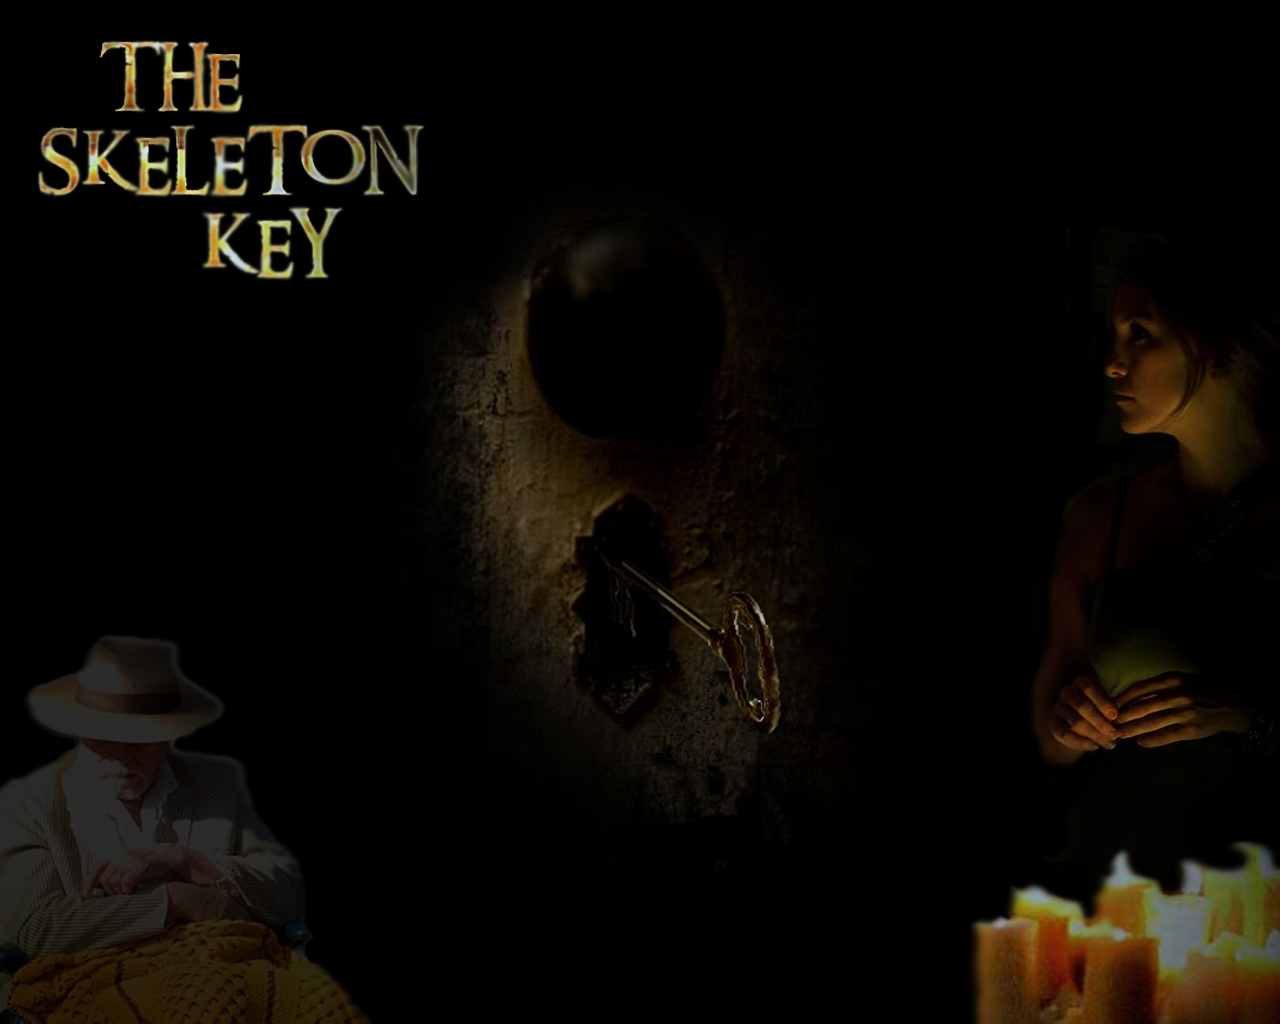 Download full size The Skeleton Key wallpaper / Movies / 1280x1024